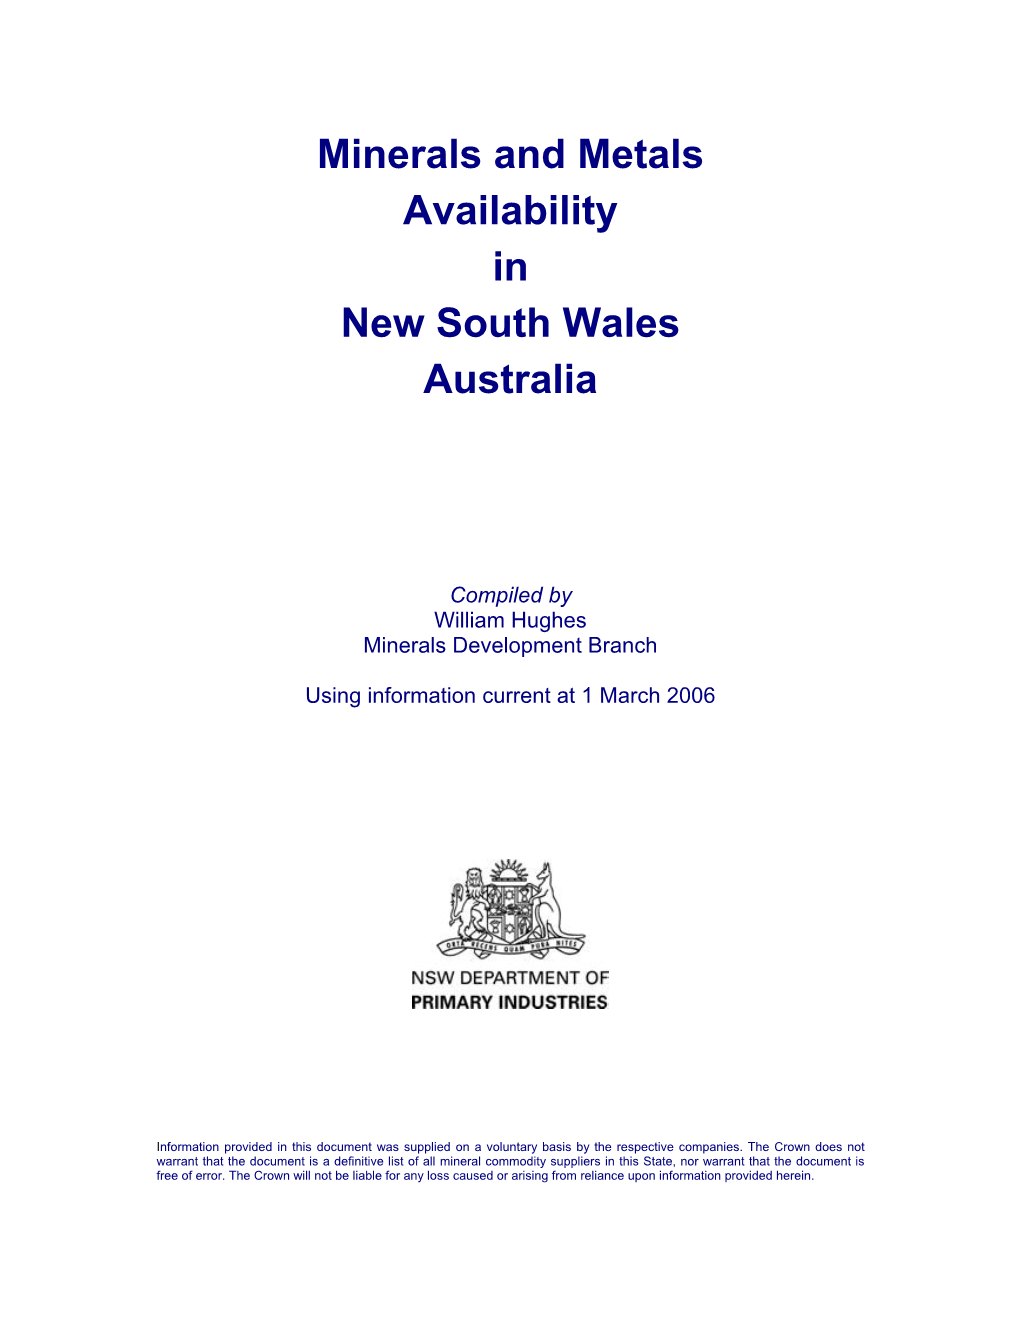 Minerals and Metals Availability in New South Wales Australia